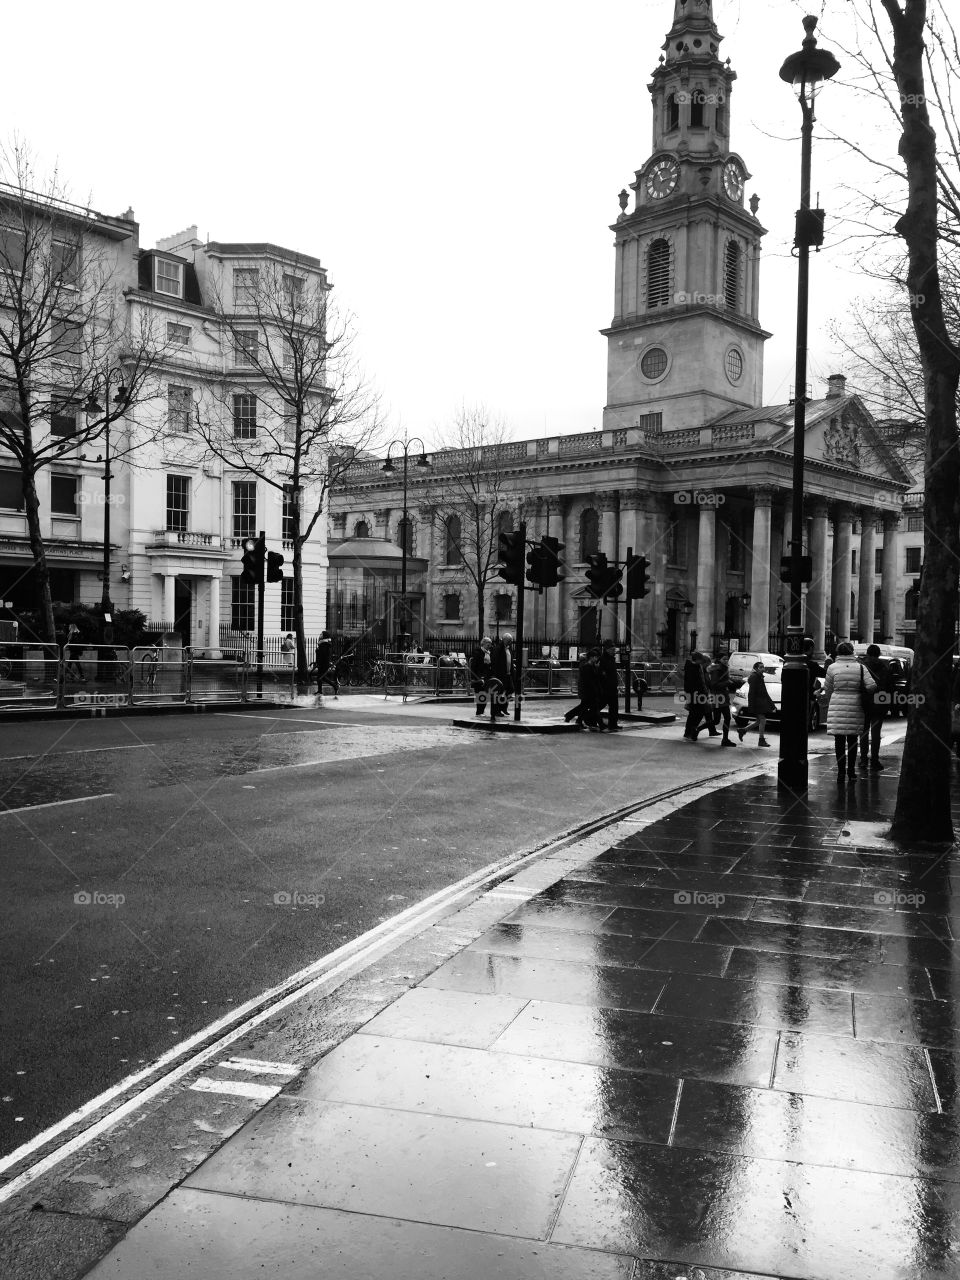 A monochrome capture of typical English weather- heavy rain. Captures the reality of London, with the hustle and bustle, along with the striking architecture. 